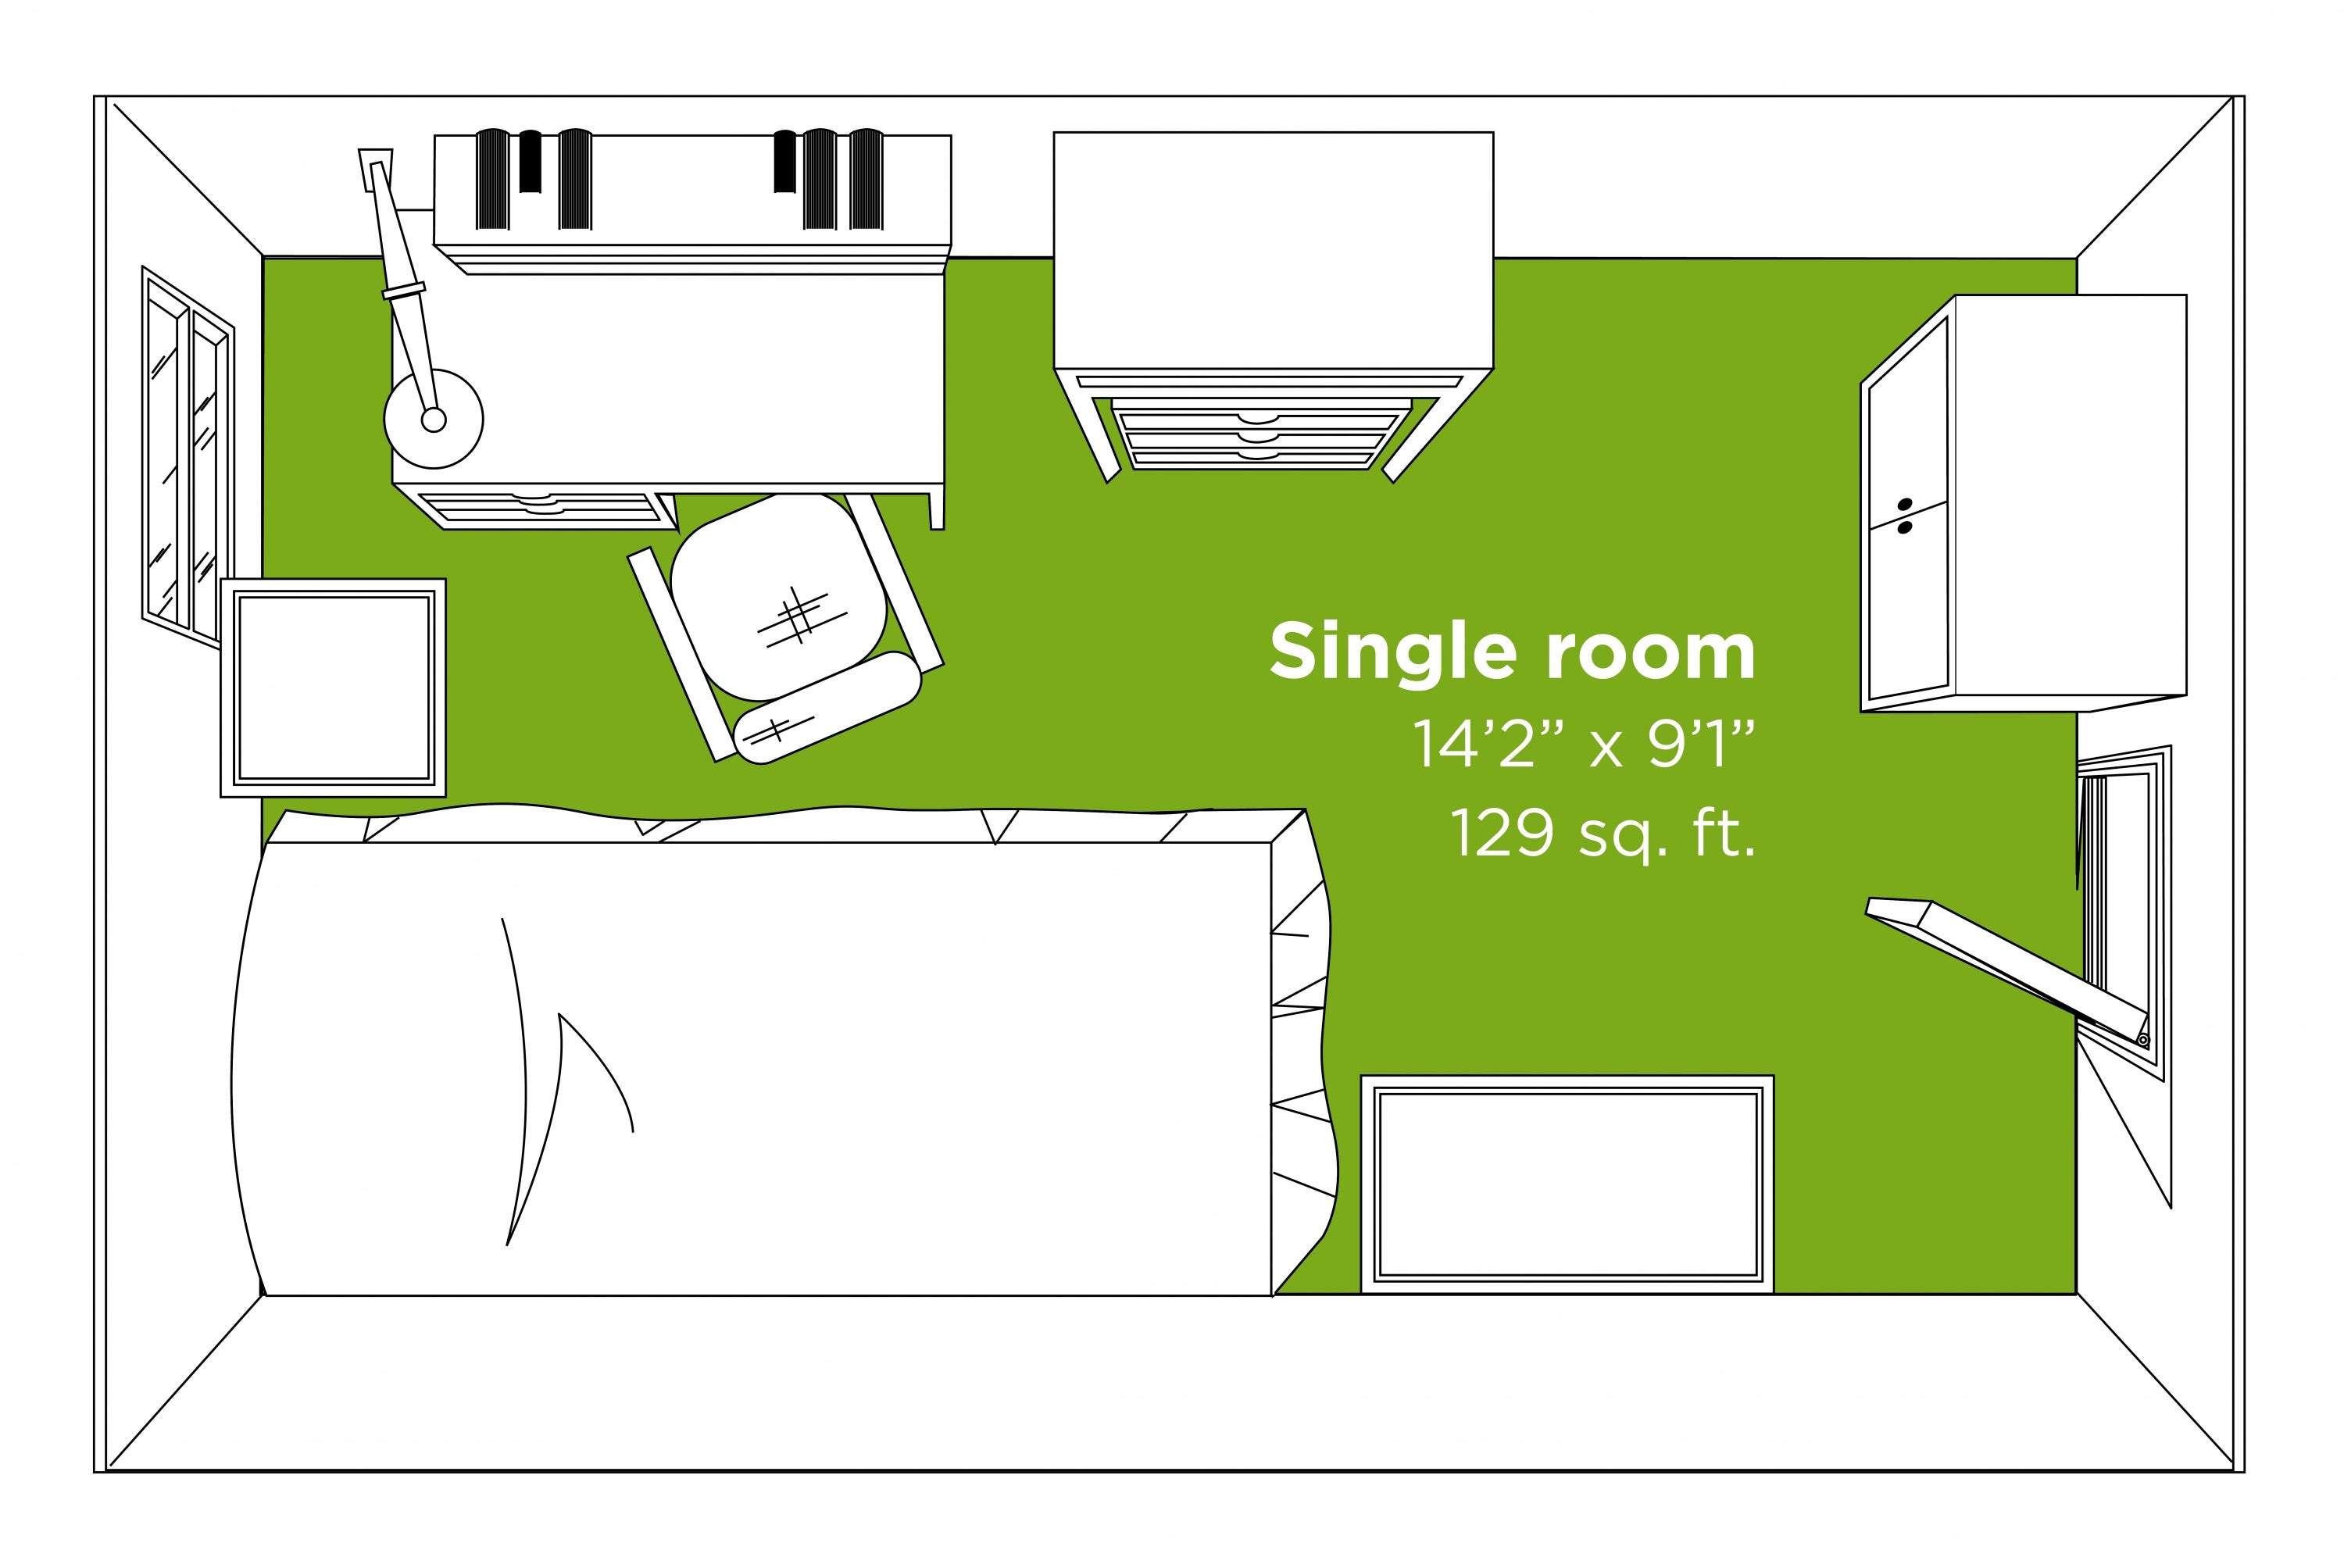 Traditional single room layout